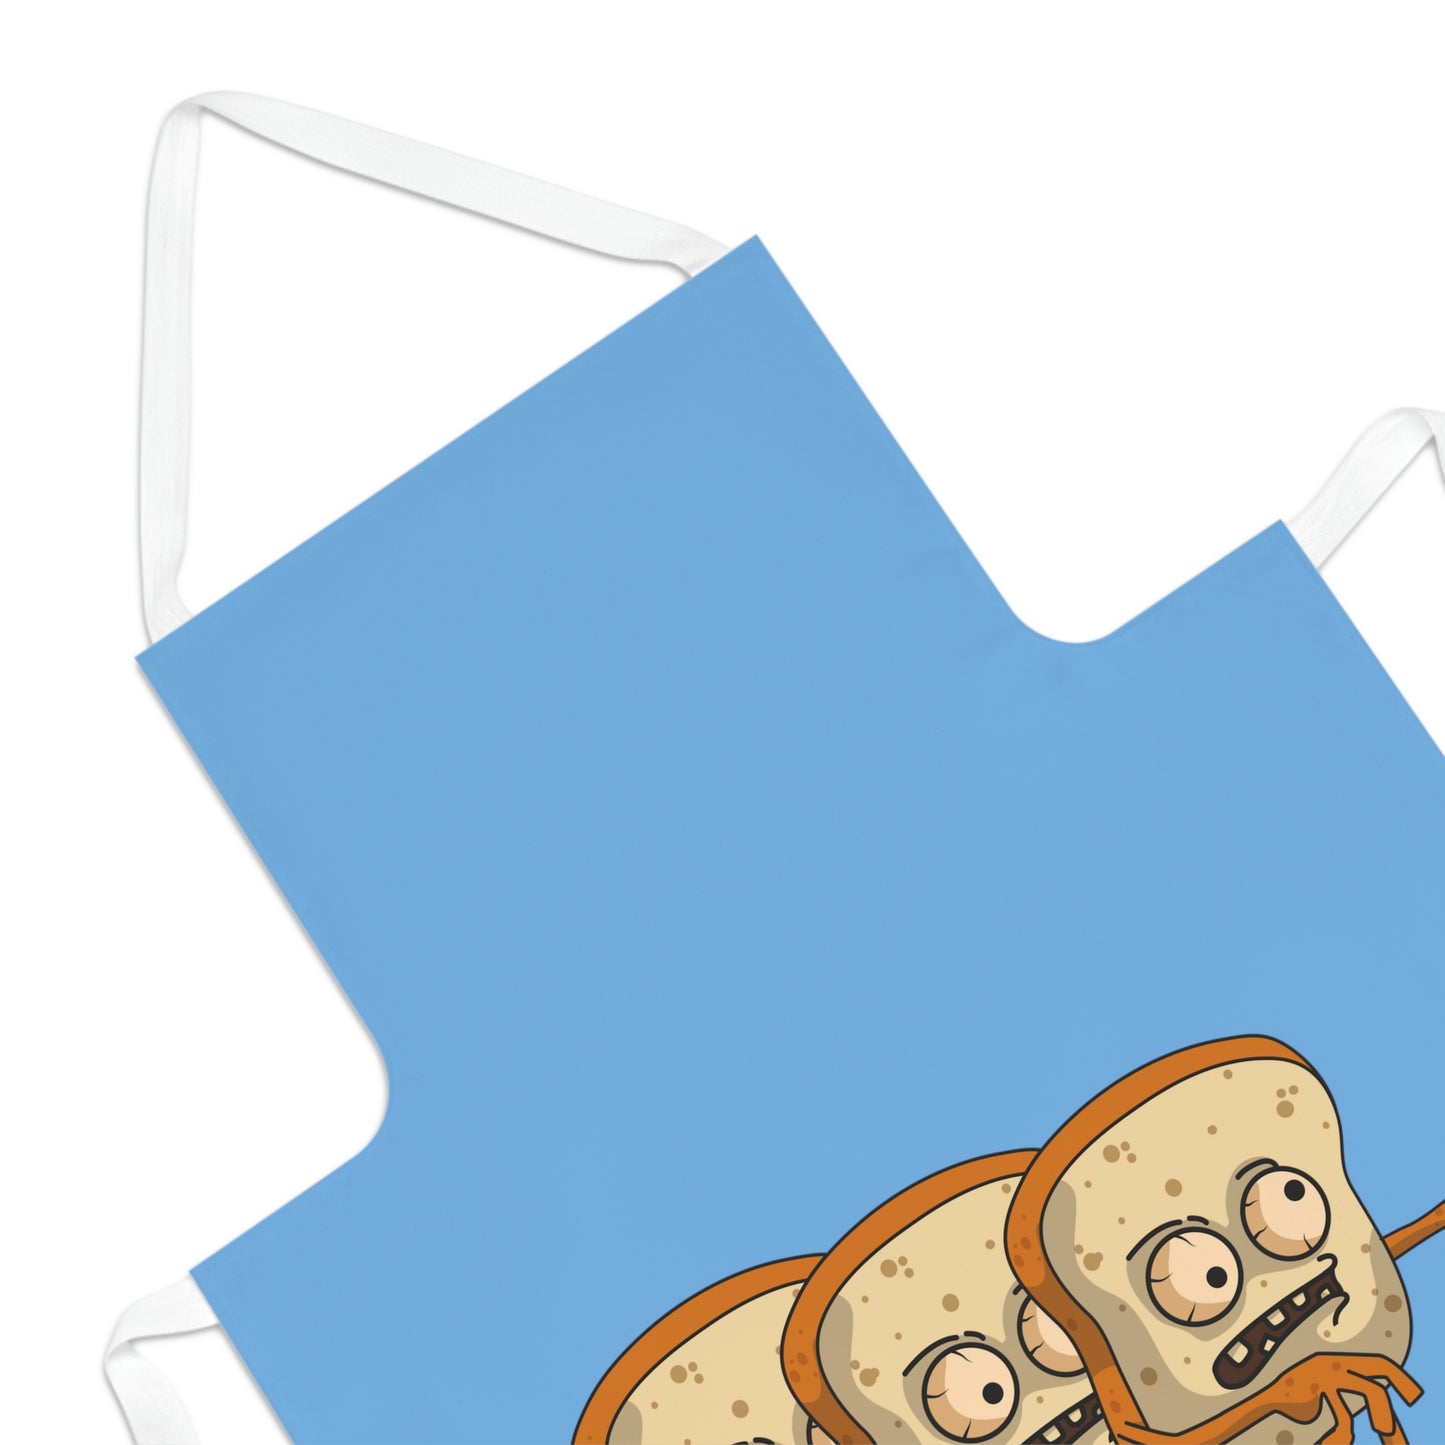 The Walking Bread- Adult Apron